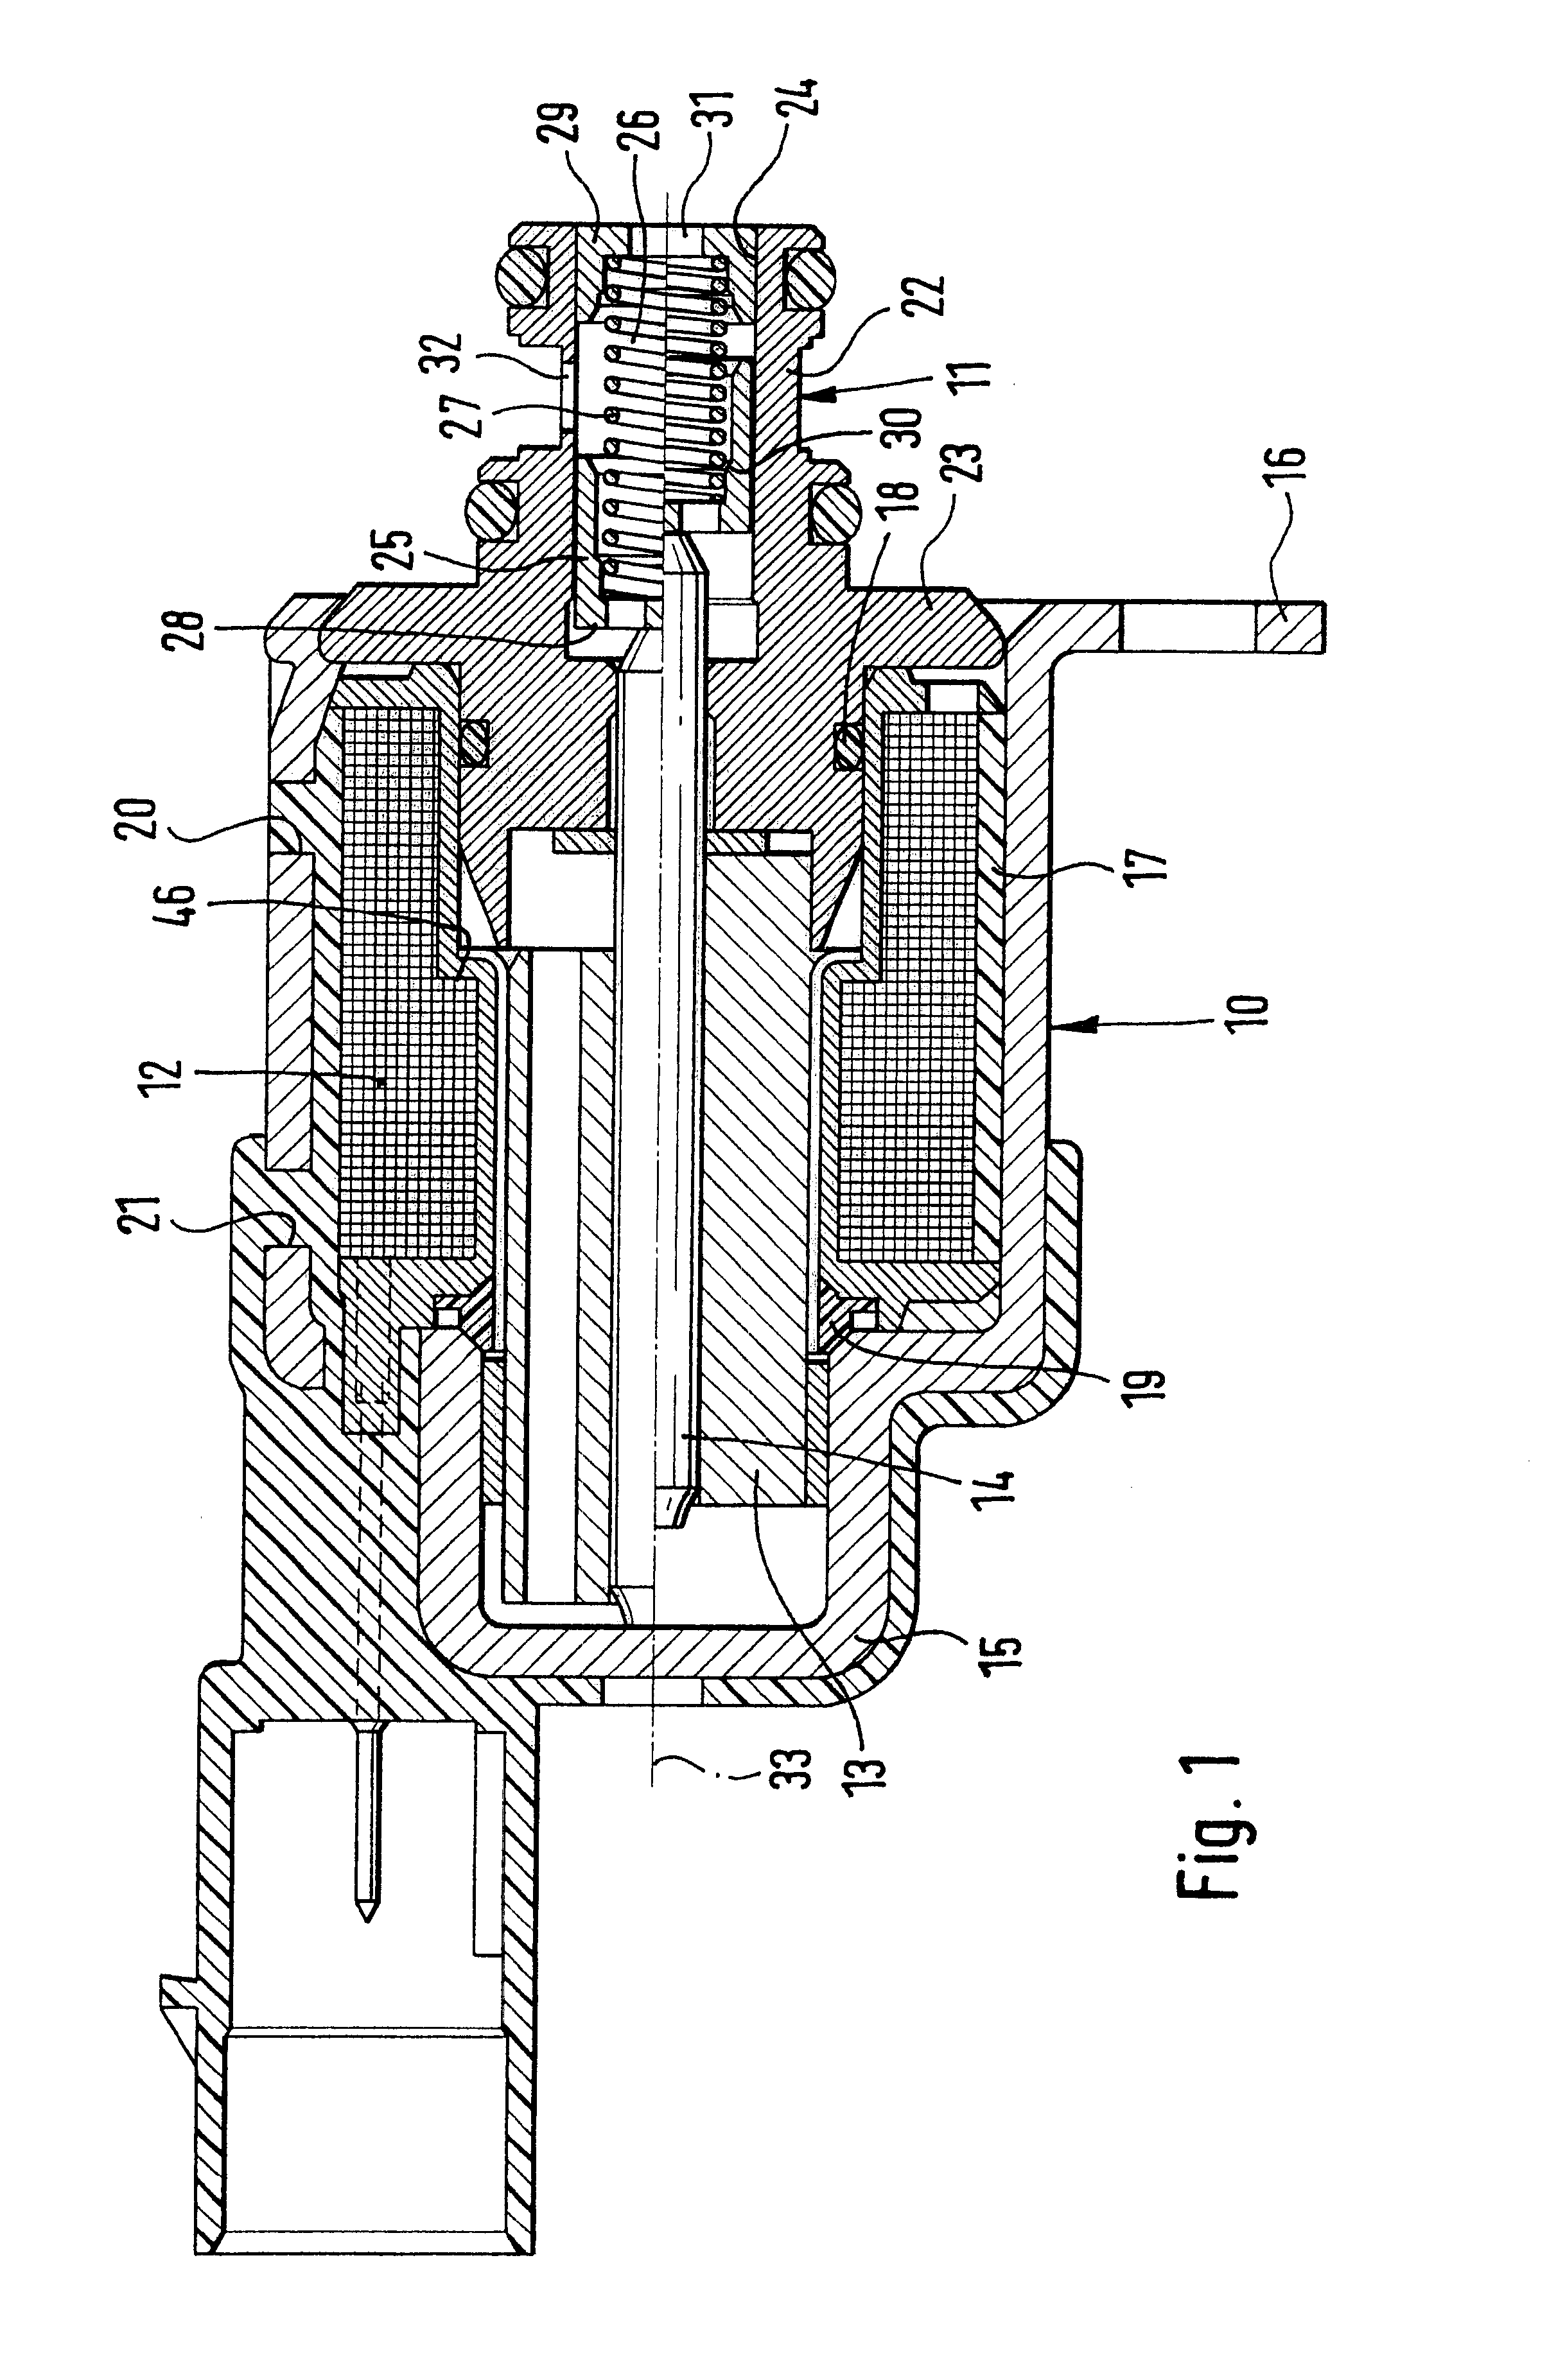 Metering unit for a fuel injection system for internal combustion engines